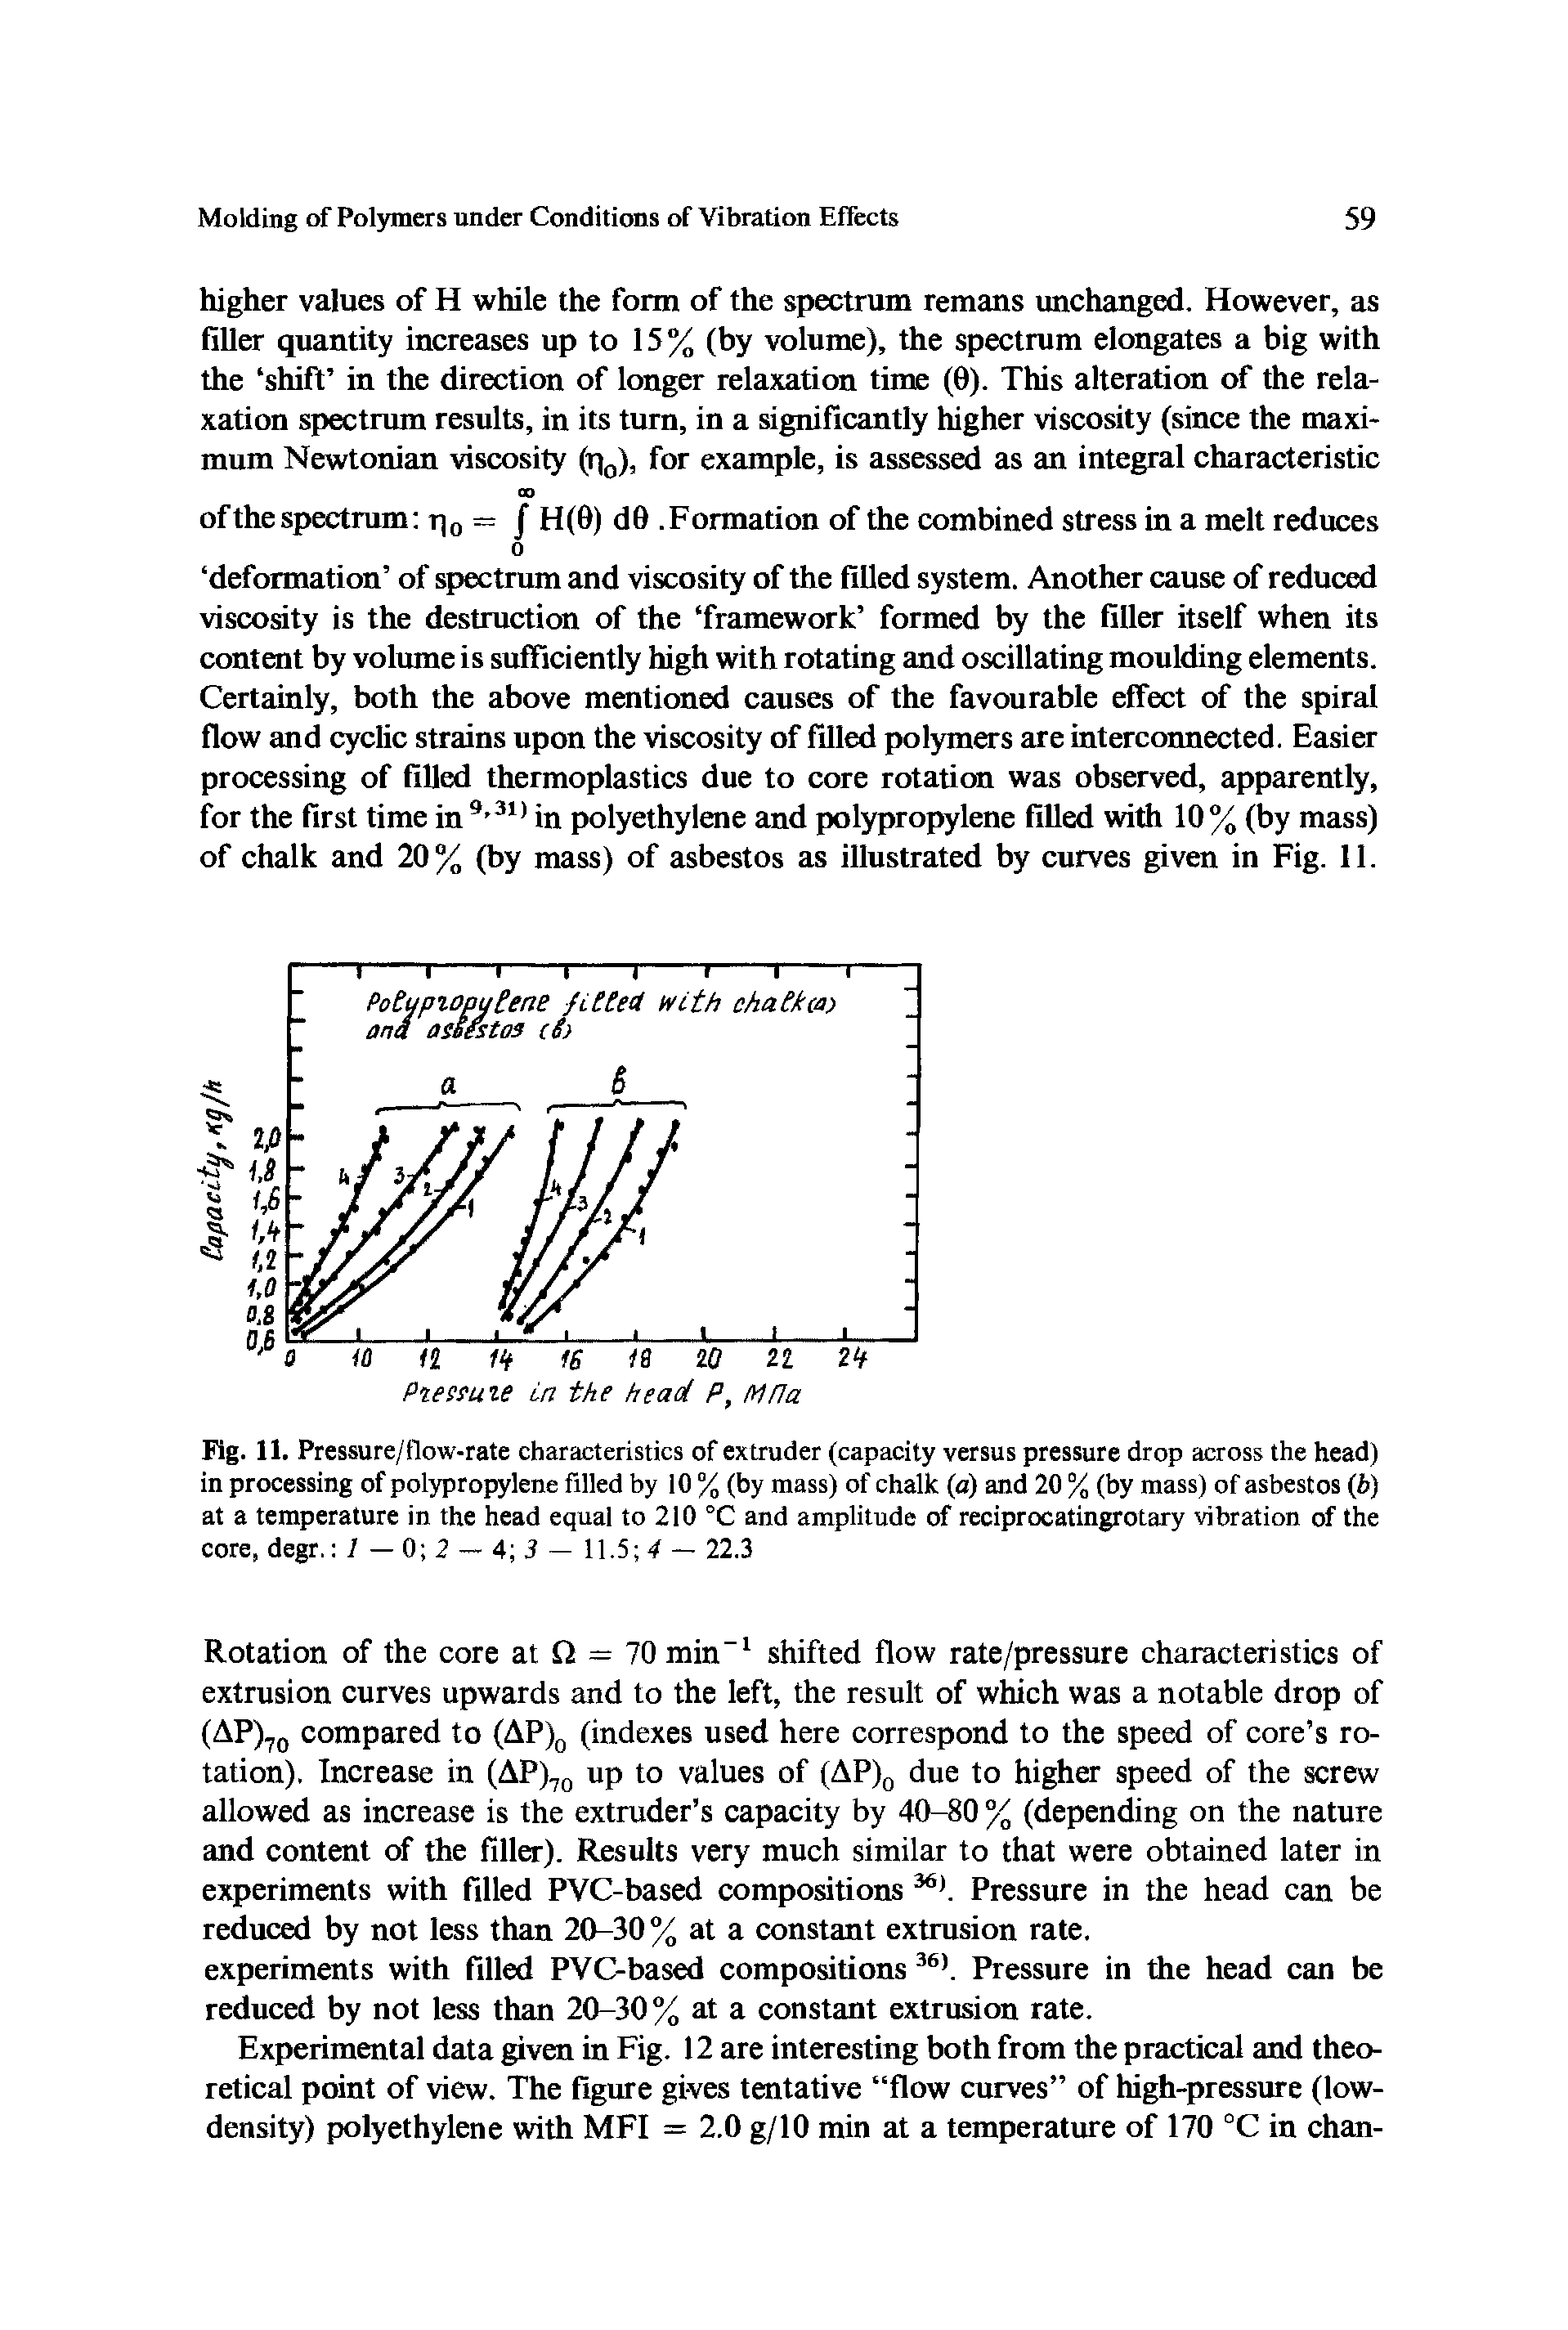 Fig. 11. Pressure/flow-rate characteristics of extruder (capacity versus pressure drop across the head) in processing of polypropylene filled by 10 % (by mass) of chalk (a) and 20 % (by mass) of asbestos (b) at a temperature in the head equal to 210 °C and amplitude of reciprocatingrotary vibration of the core, degr.— 0 2 — 4 3 — 11.5 — 22.3...